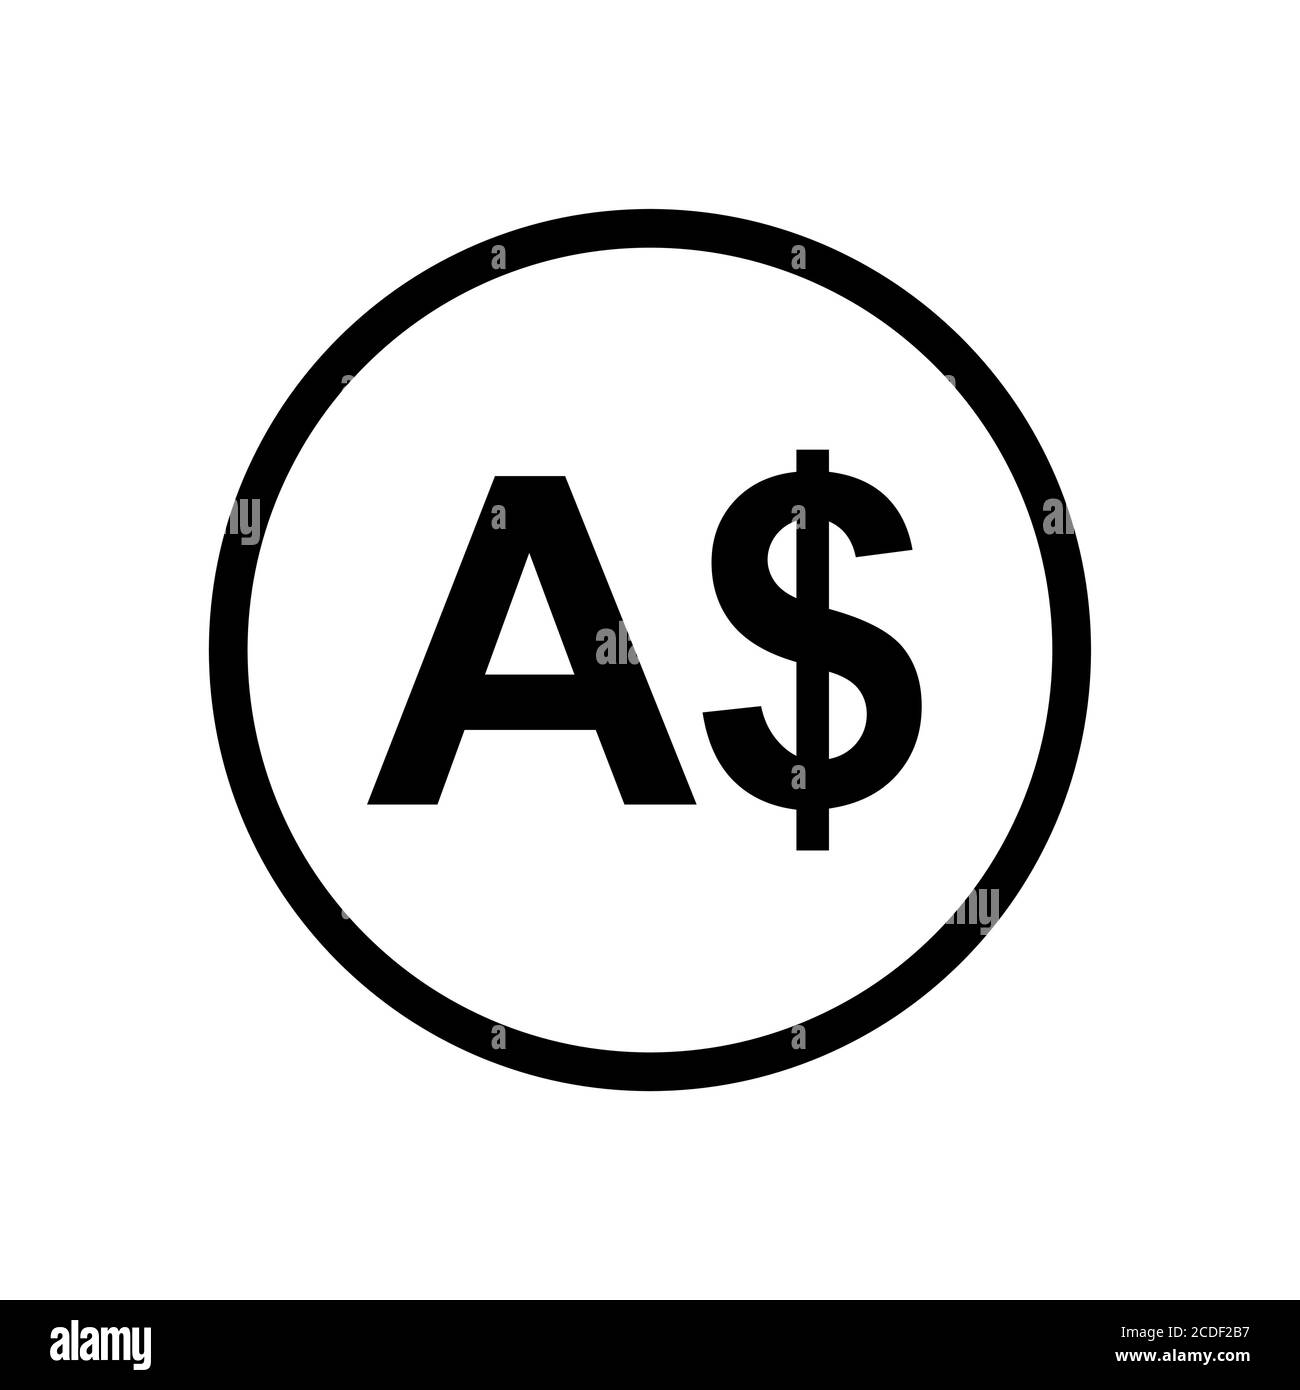 Australian Dollar coin monochrome black and white icon. Current currency symbol. Stock Vector